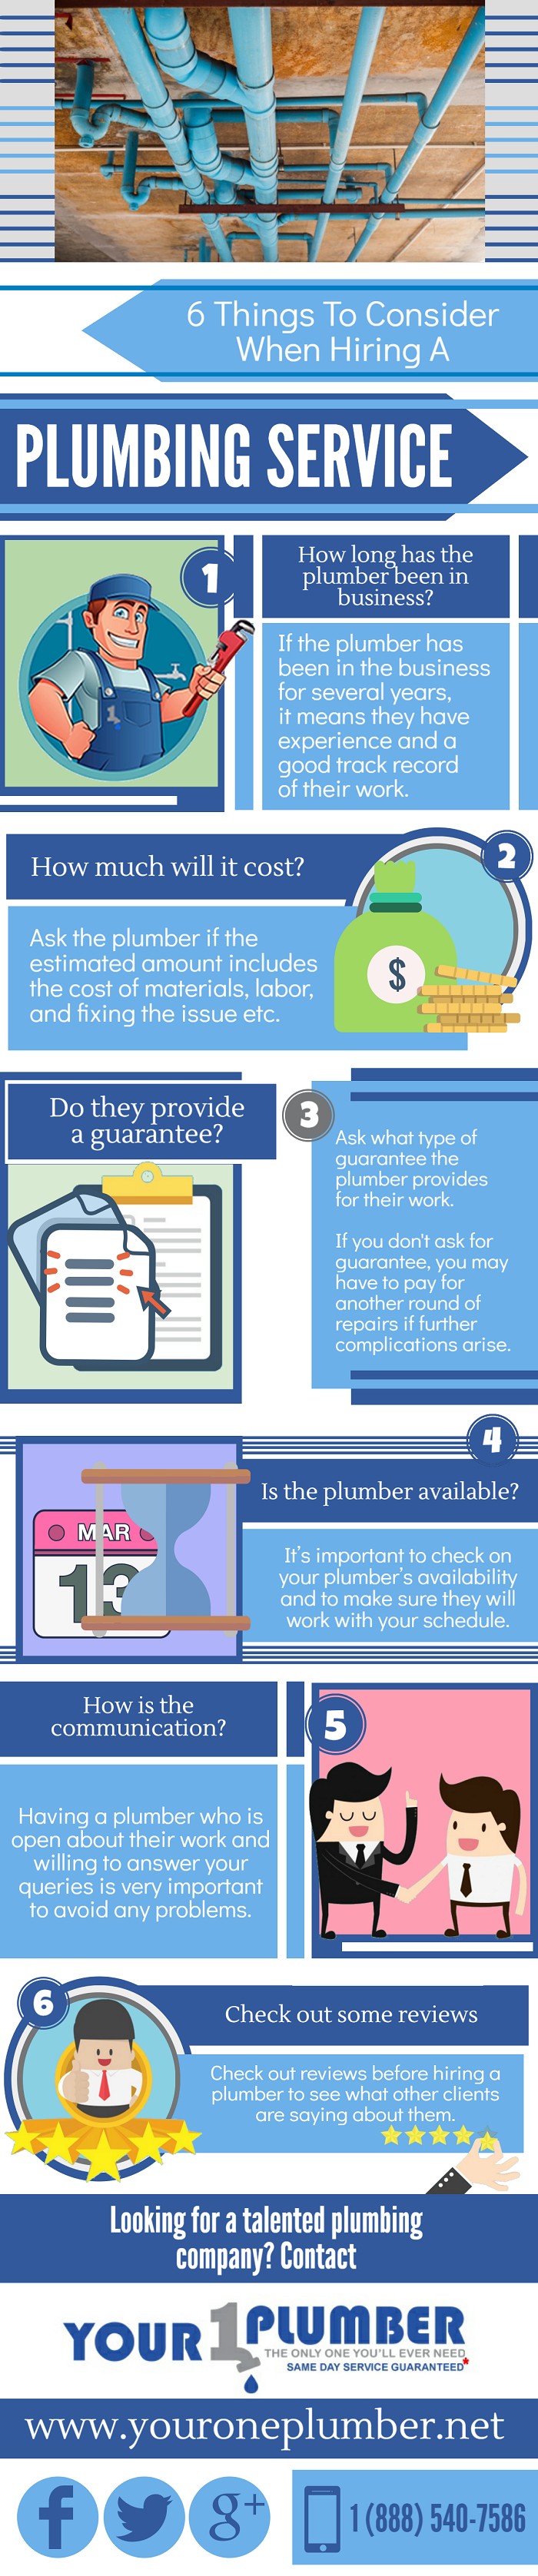 6 Things to Consider When Hiring a Plumbing Service